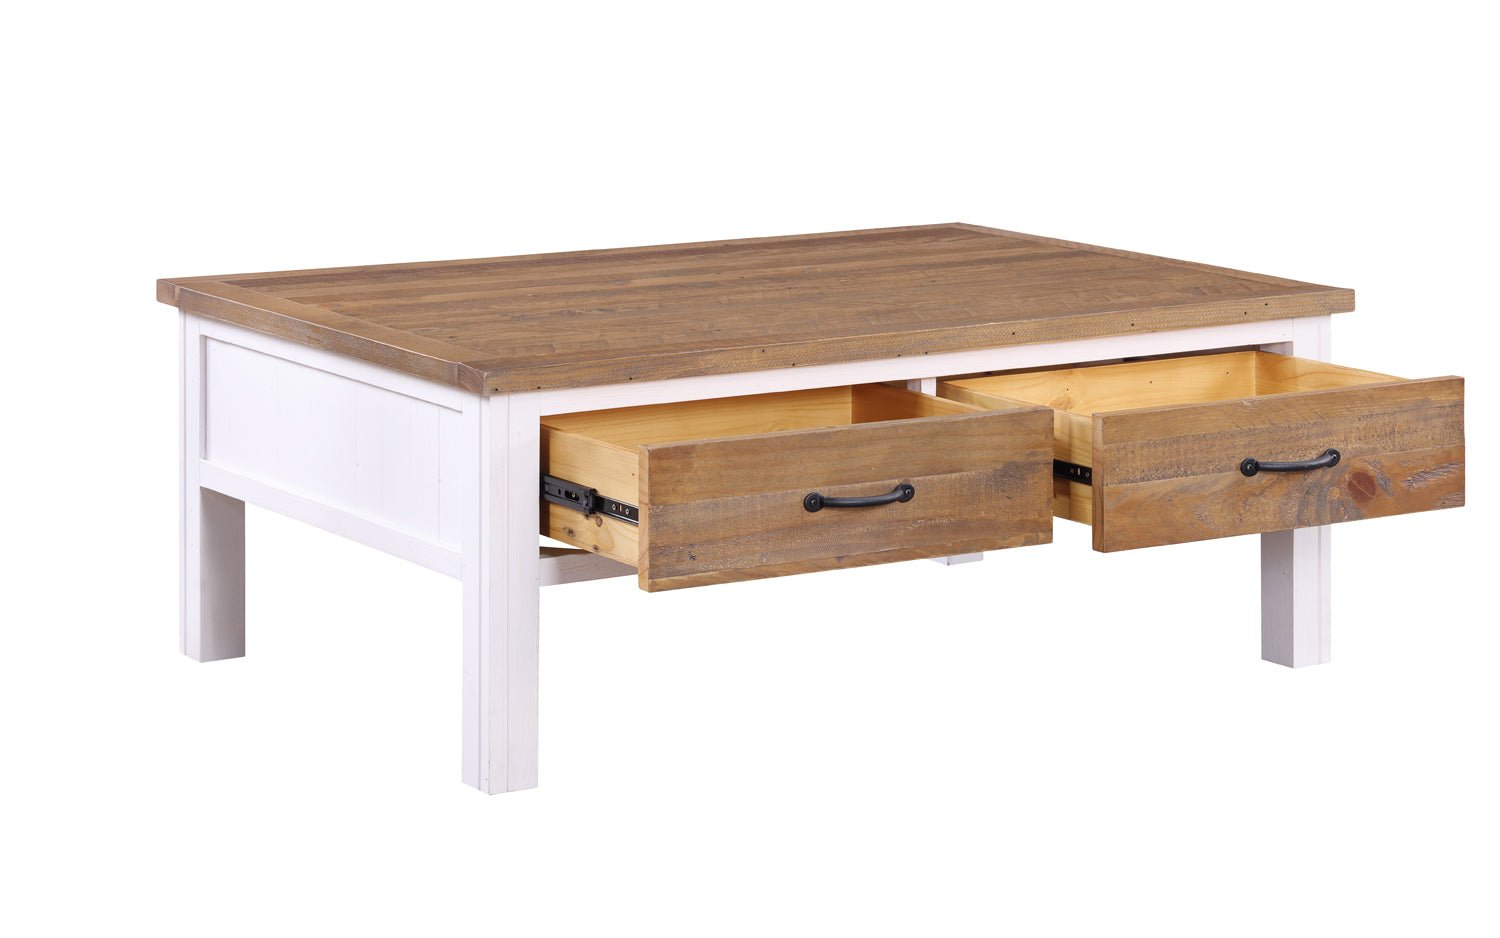 Splash of White Coffee Table With Four Drawers - Duck Barn Interiors